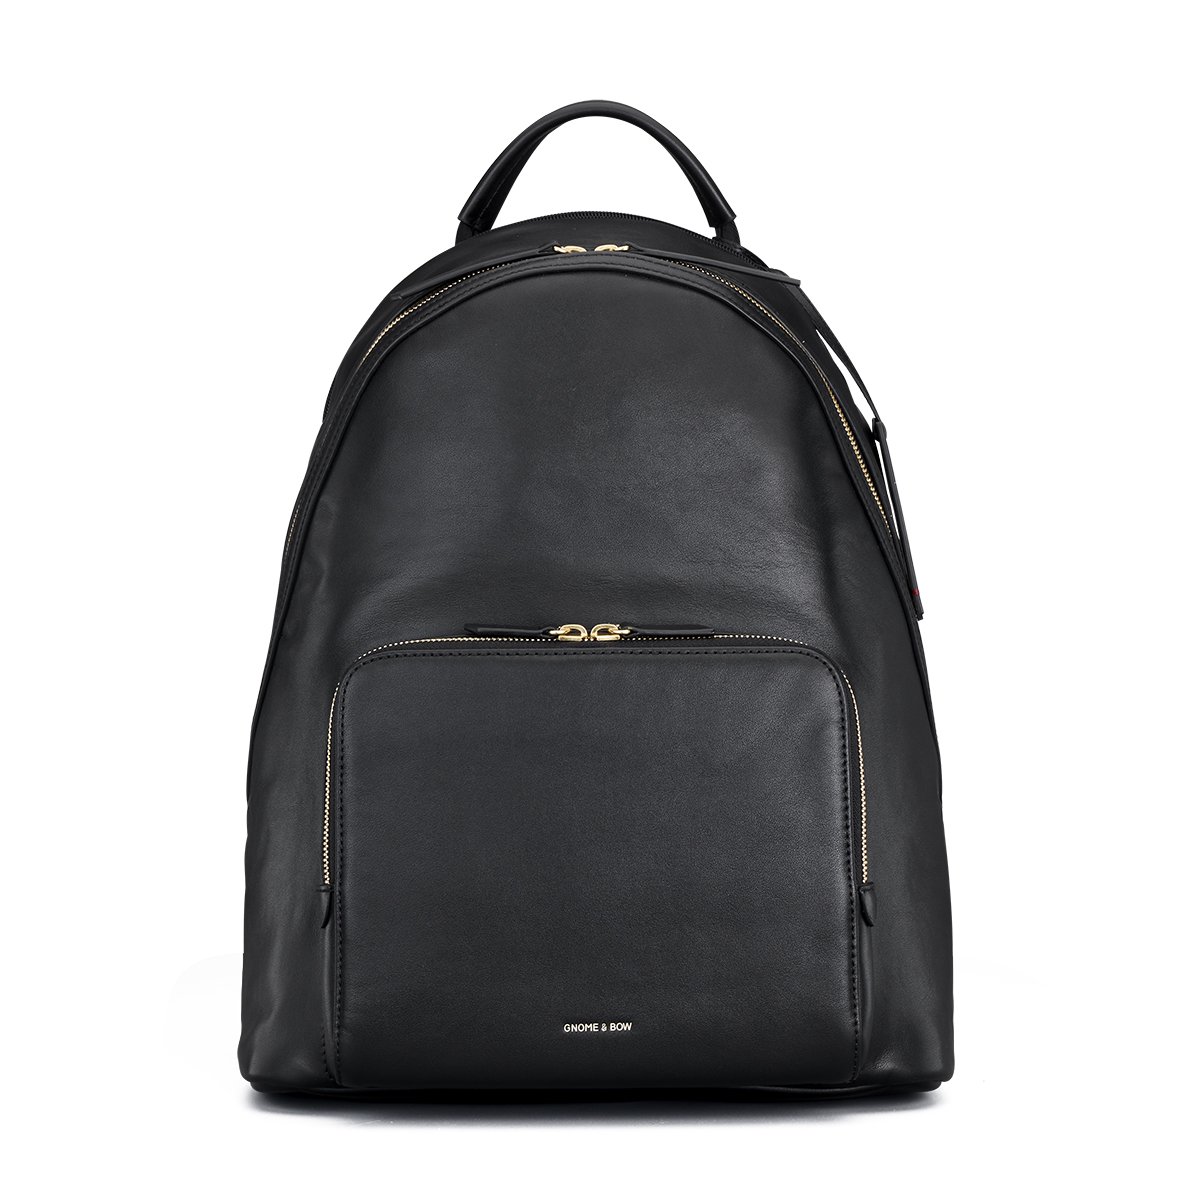 GNOME & BOW ATHOS BACKPACK (LEATHER) - BLACK | GNOME & BOW | KRISSHOP ...